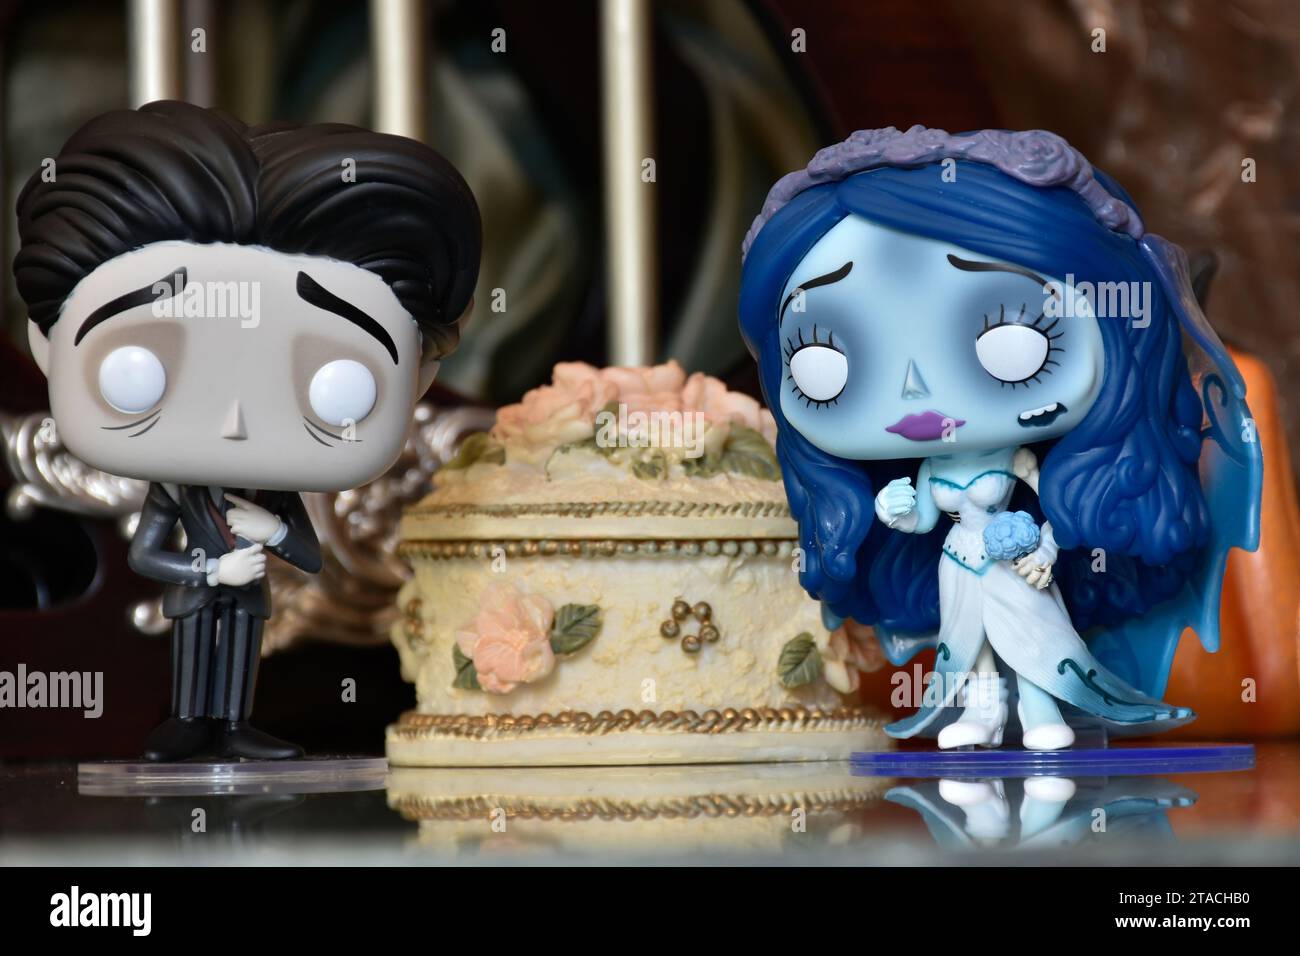 Funko Pop action figures of Emily and Victor from dark fantasy gothic animated film Corpse Bride. Vintage cage,wedding cake, romantic, gloomy. Stock Photo